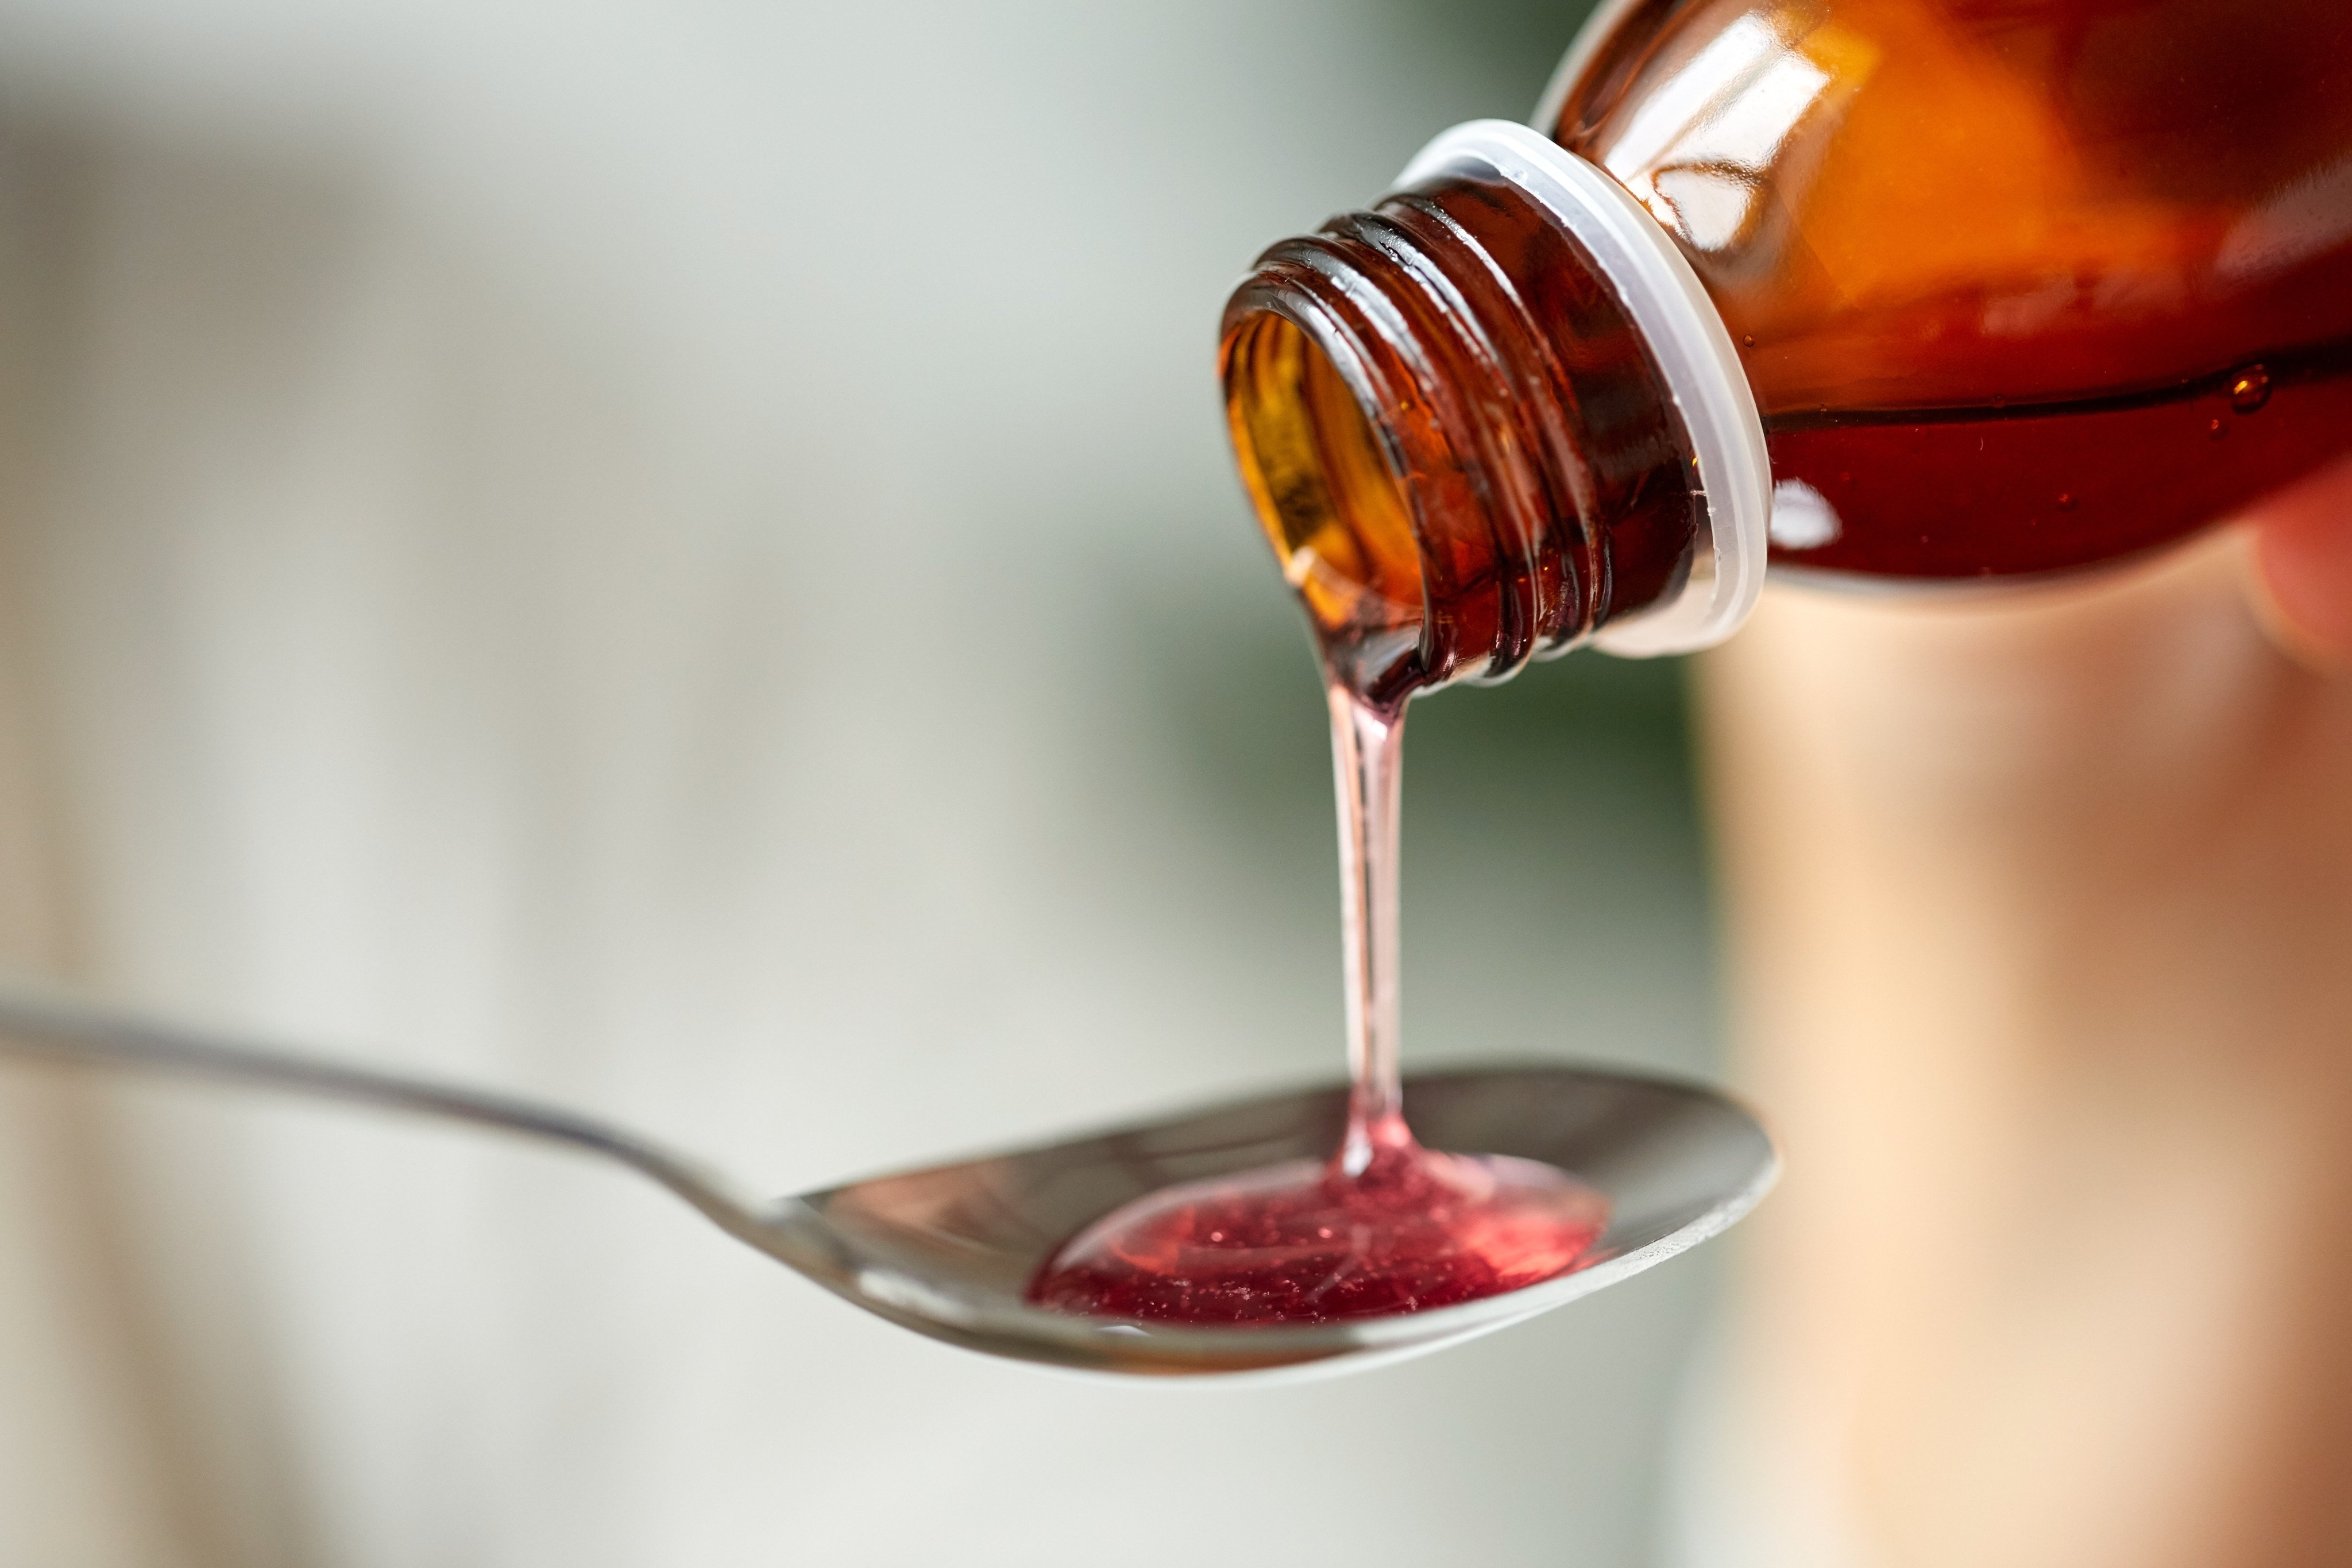 A health ministry investigation found a range of cough and fever syrups produced by two Indonesian firms had been contaminated. Photo: Shutterstock/File